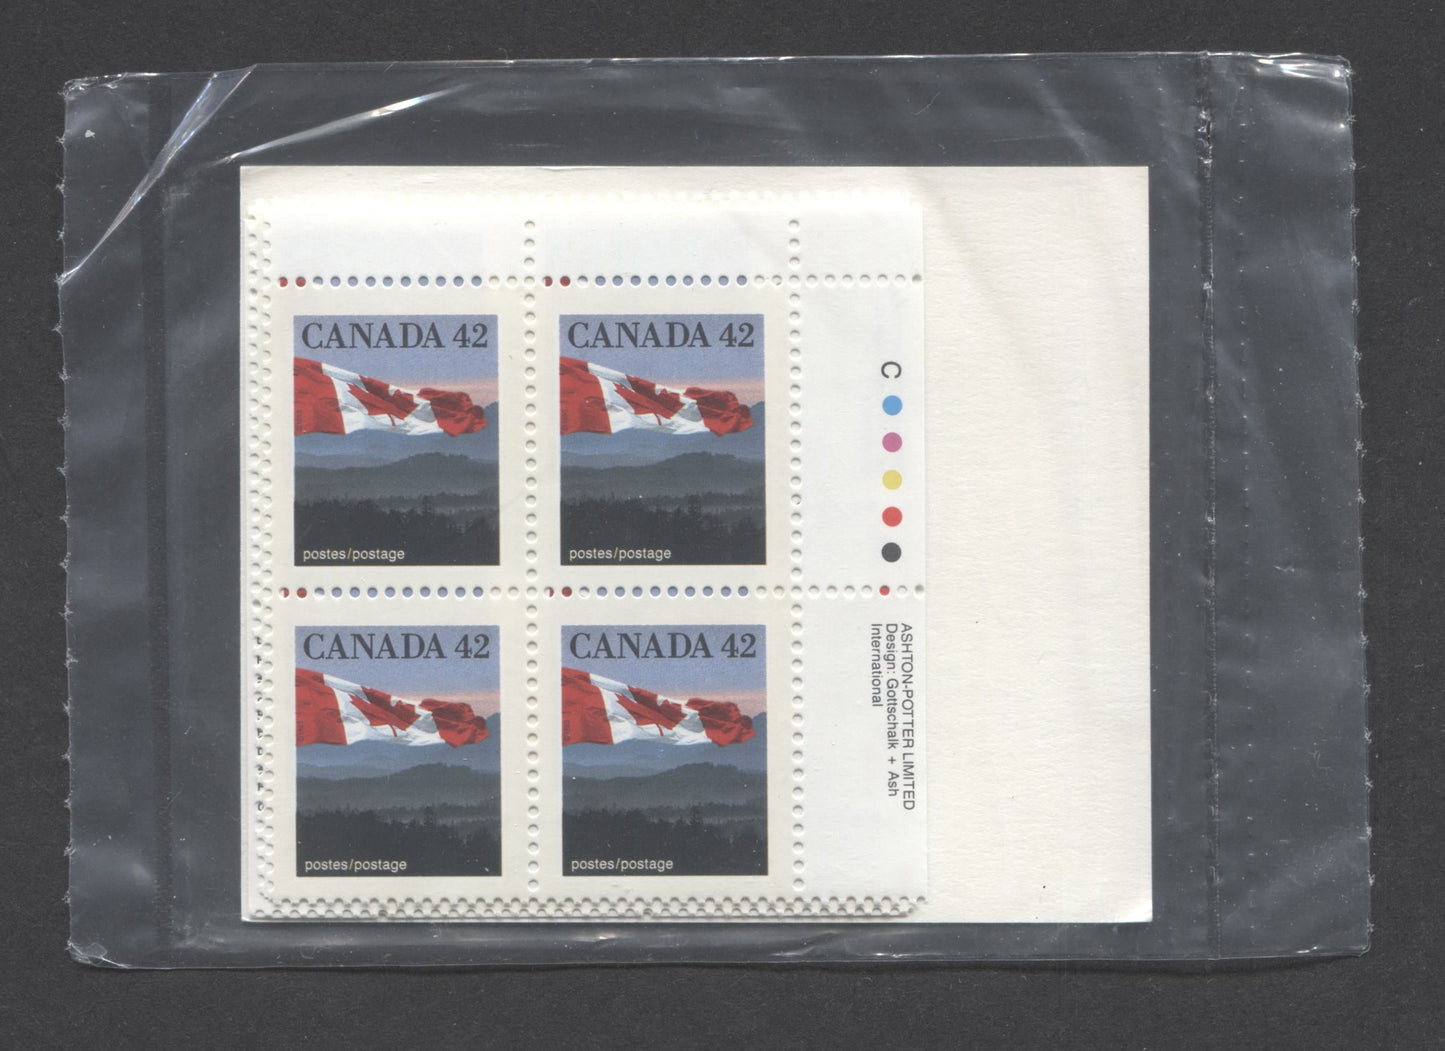 Lot 31 Canada #1356 42c Multicoloured 1991 Domestic First-Class Rate Issue, Canada Post Sealed Pack of Inscription Blocks, On CPP Paper, With DF Type 6C Insert Card, VFNH, Unitrade Cat. $20